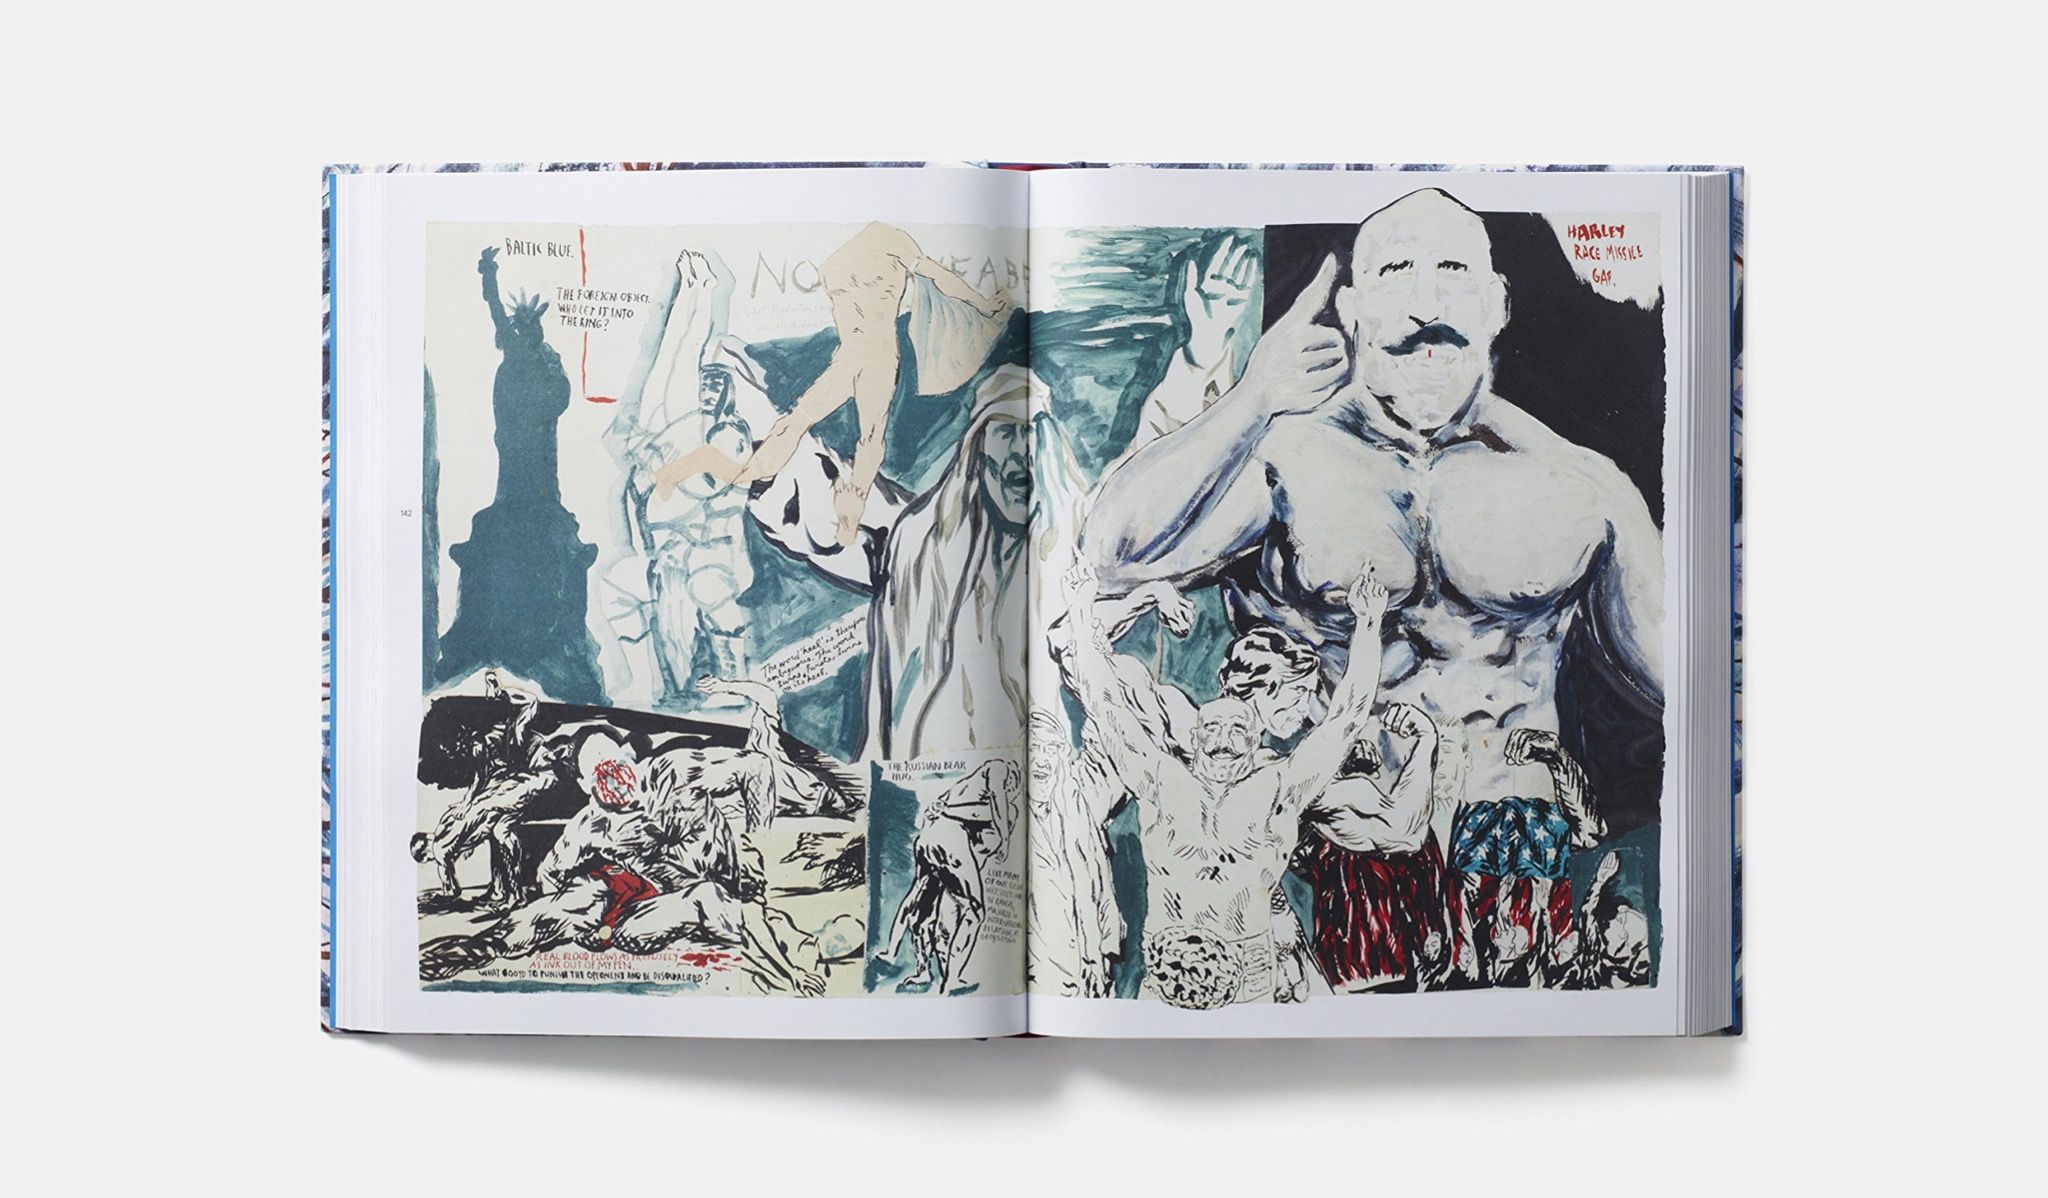  Raymond Pettibon: A Pen of All Work: Published in Association with the New Museum 